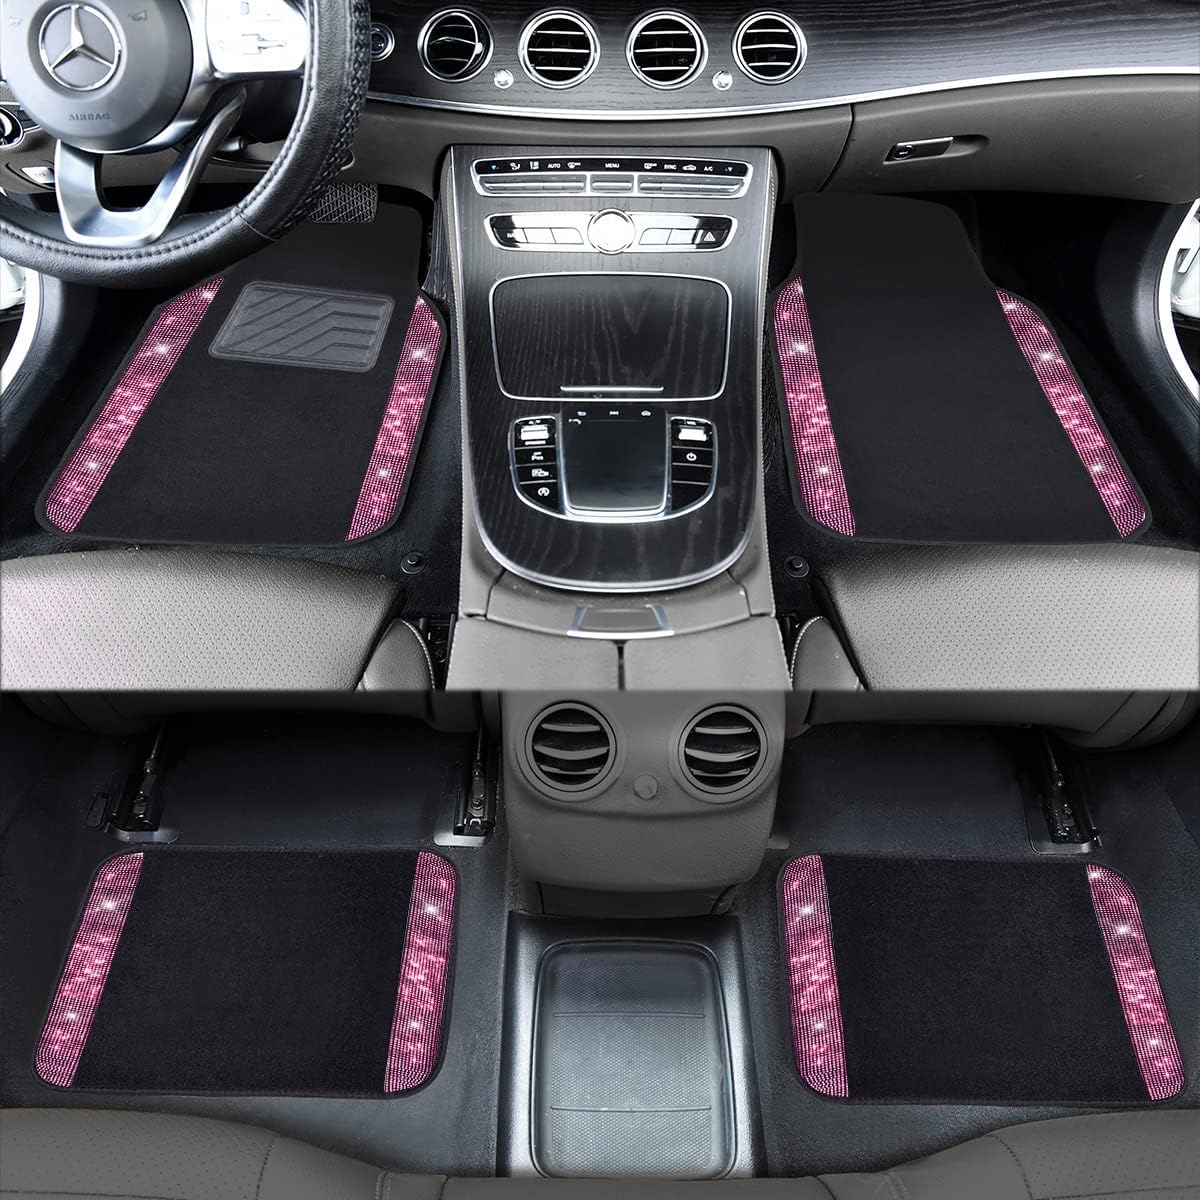 CAR PASS Bling Diamond Car Floor Mats & Car Steering Wheel Cover & Car Seat Cover Two Fromt Seats, Pink Diamond